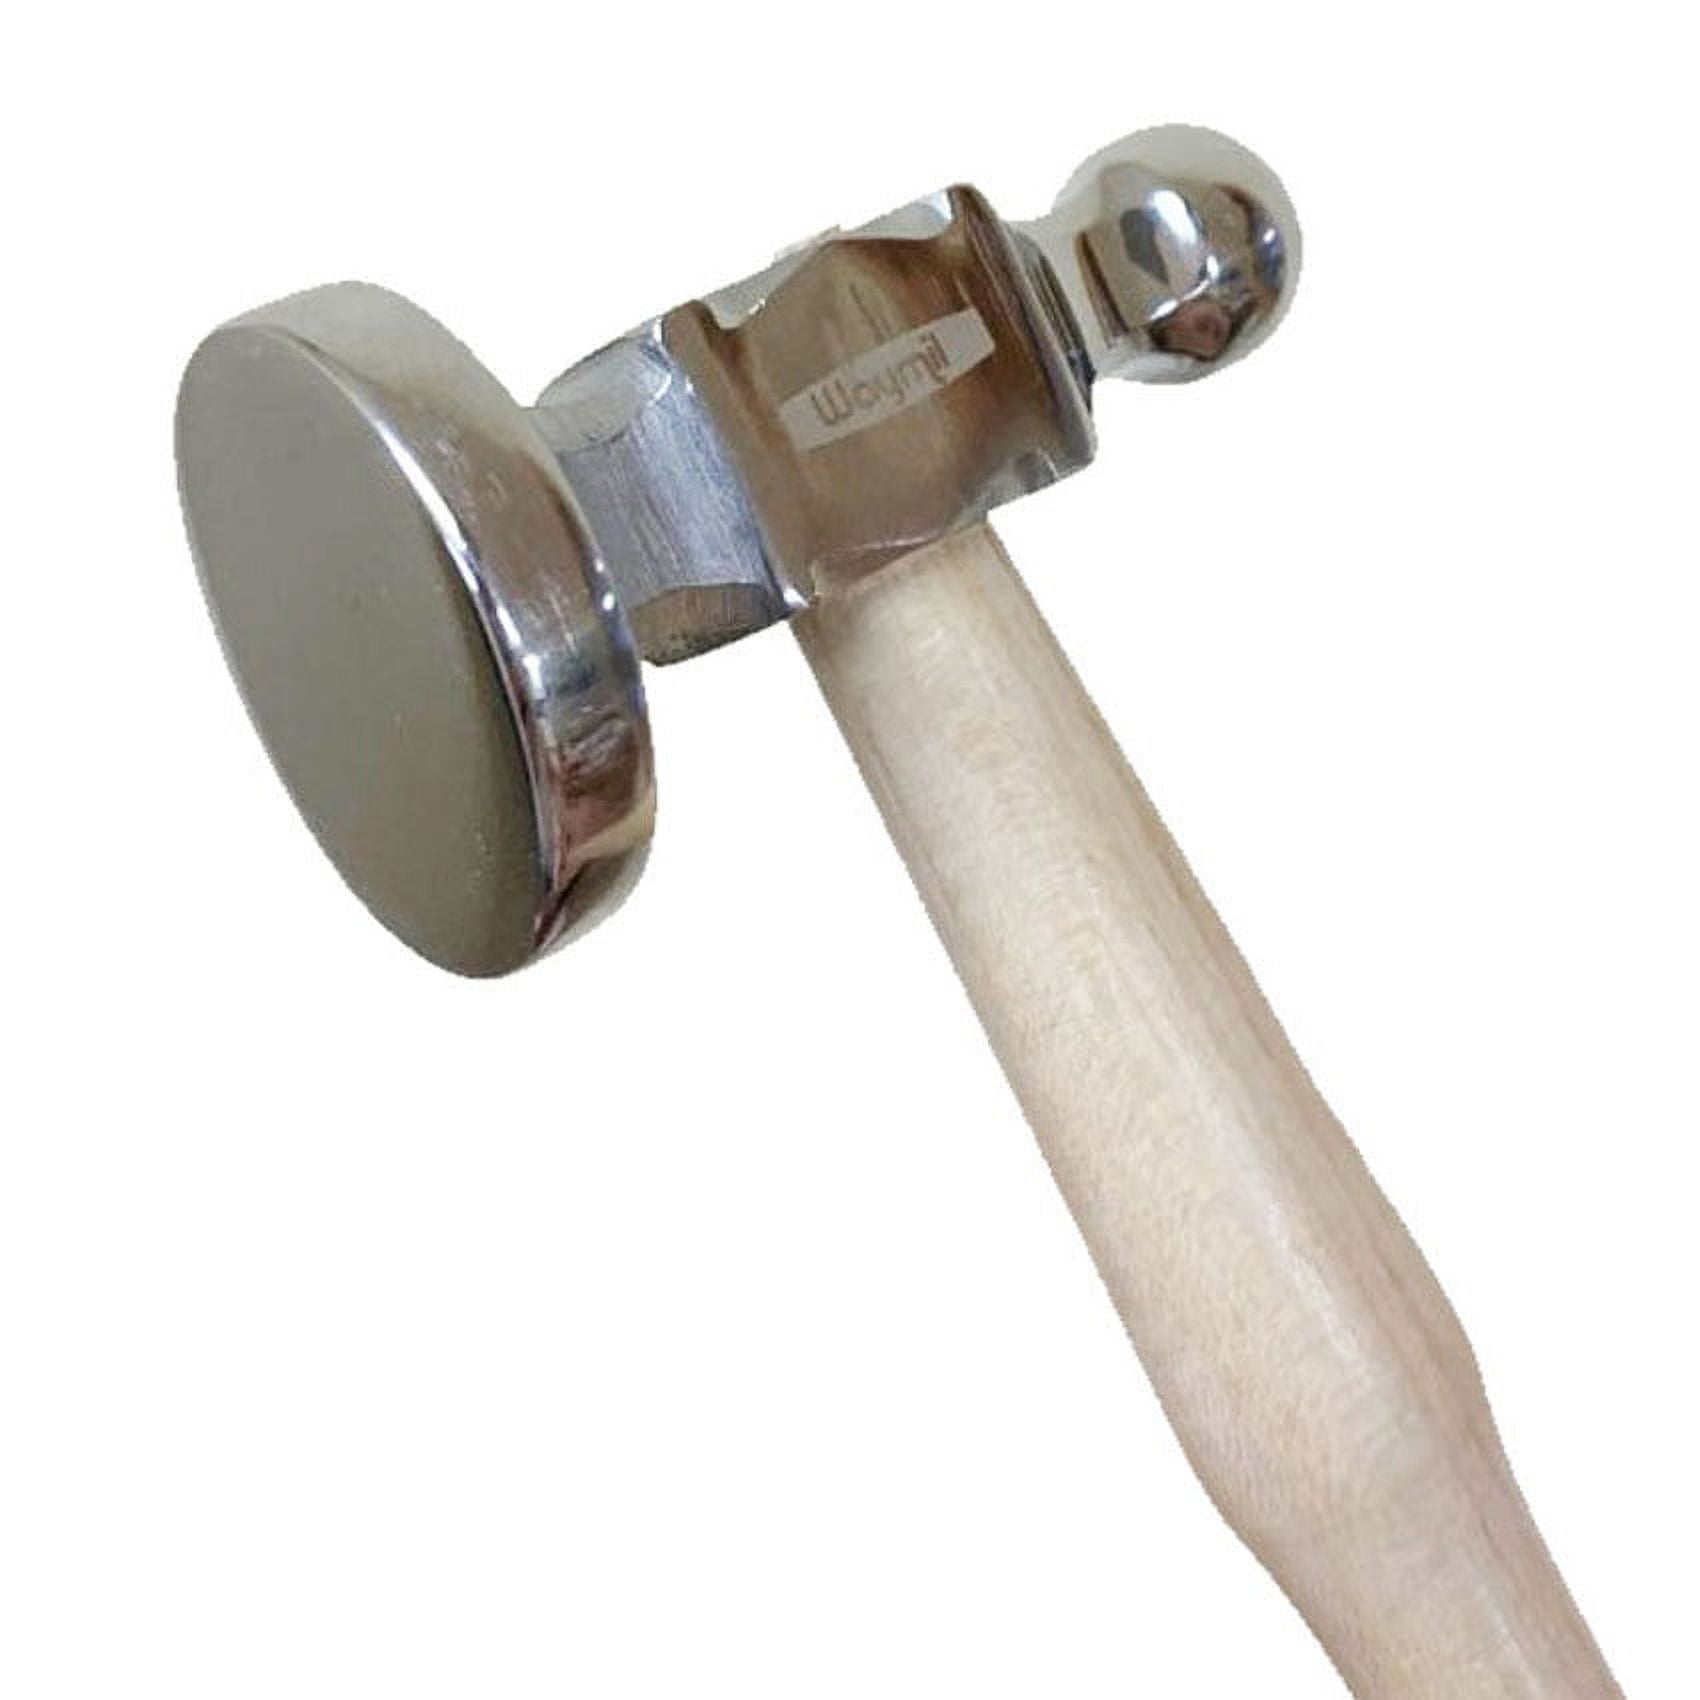 Jewelers Chasing Hammer 1-1/4 - 32mm Small Flat Face Jewelry Hammers